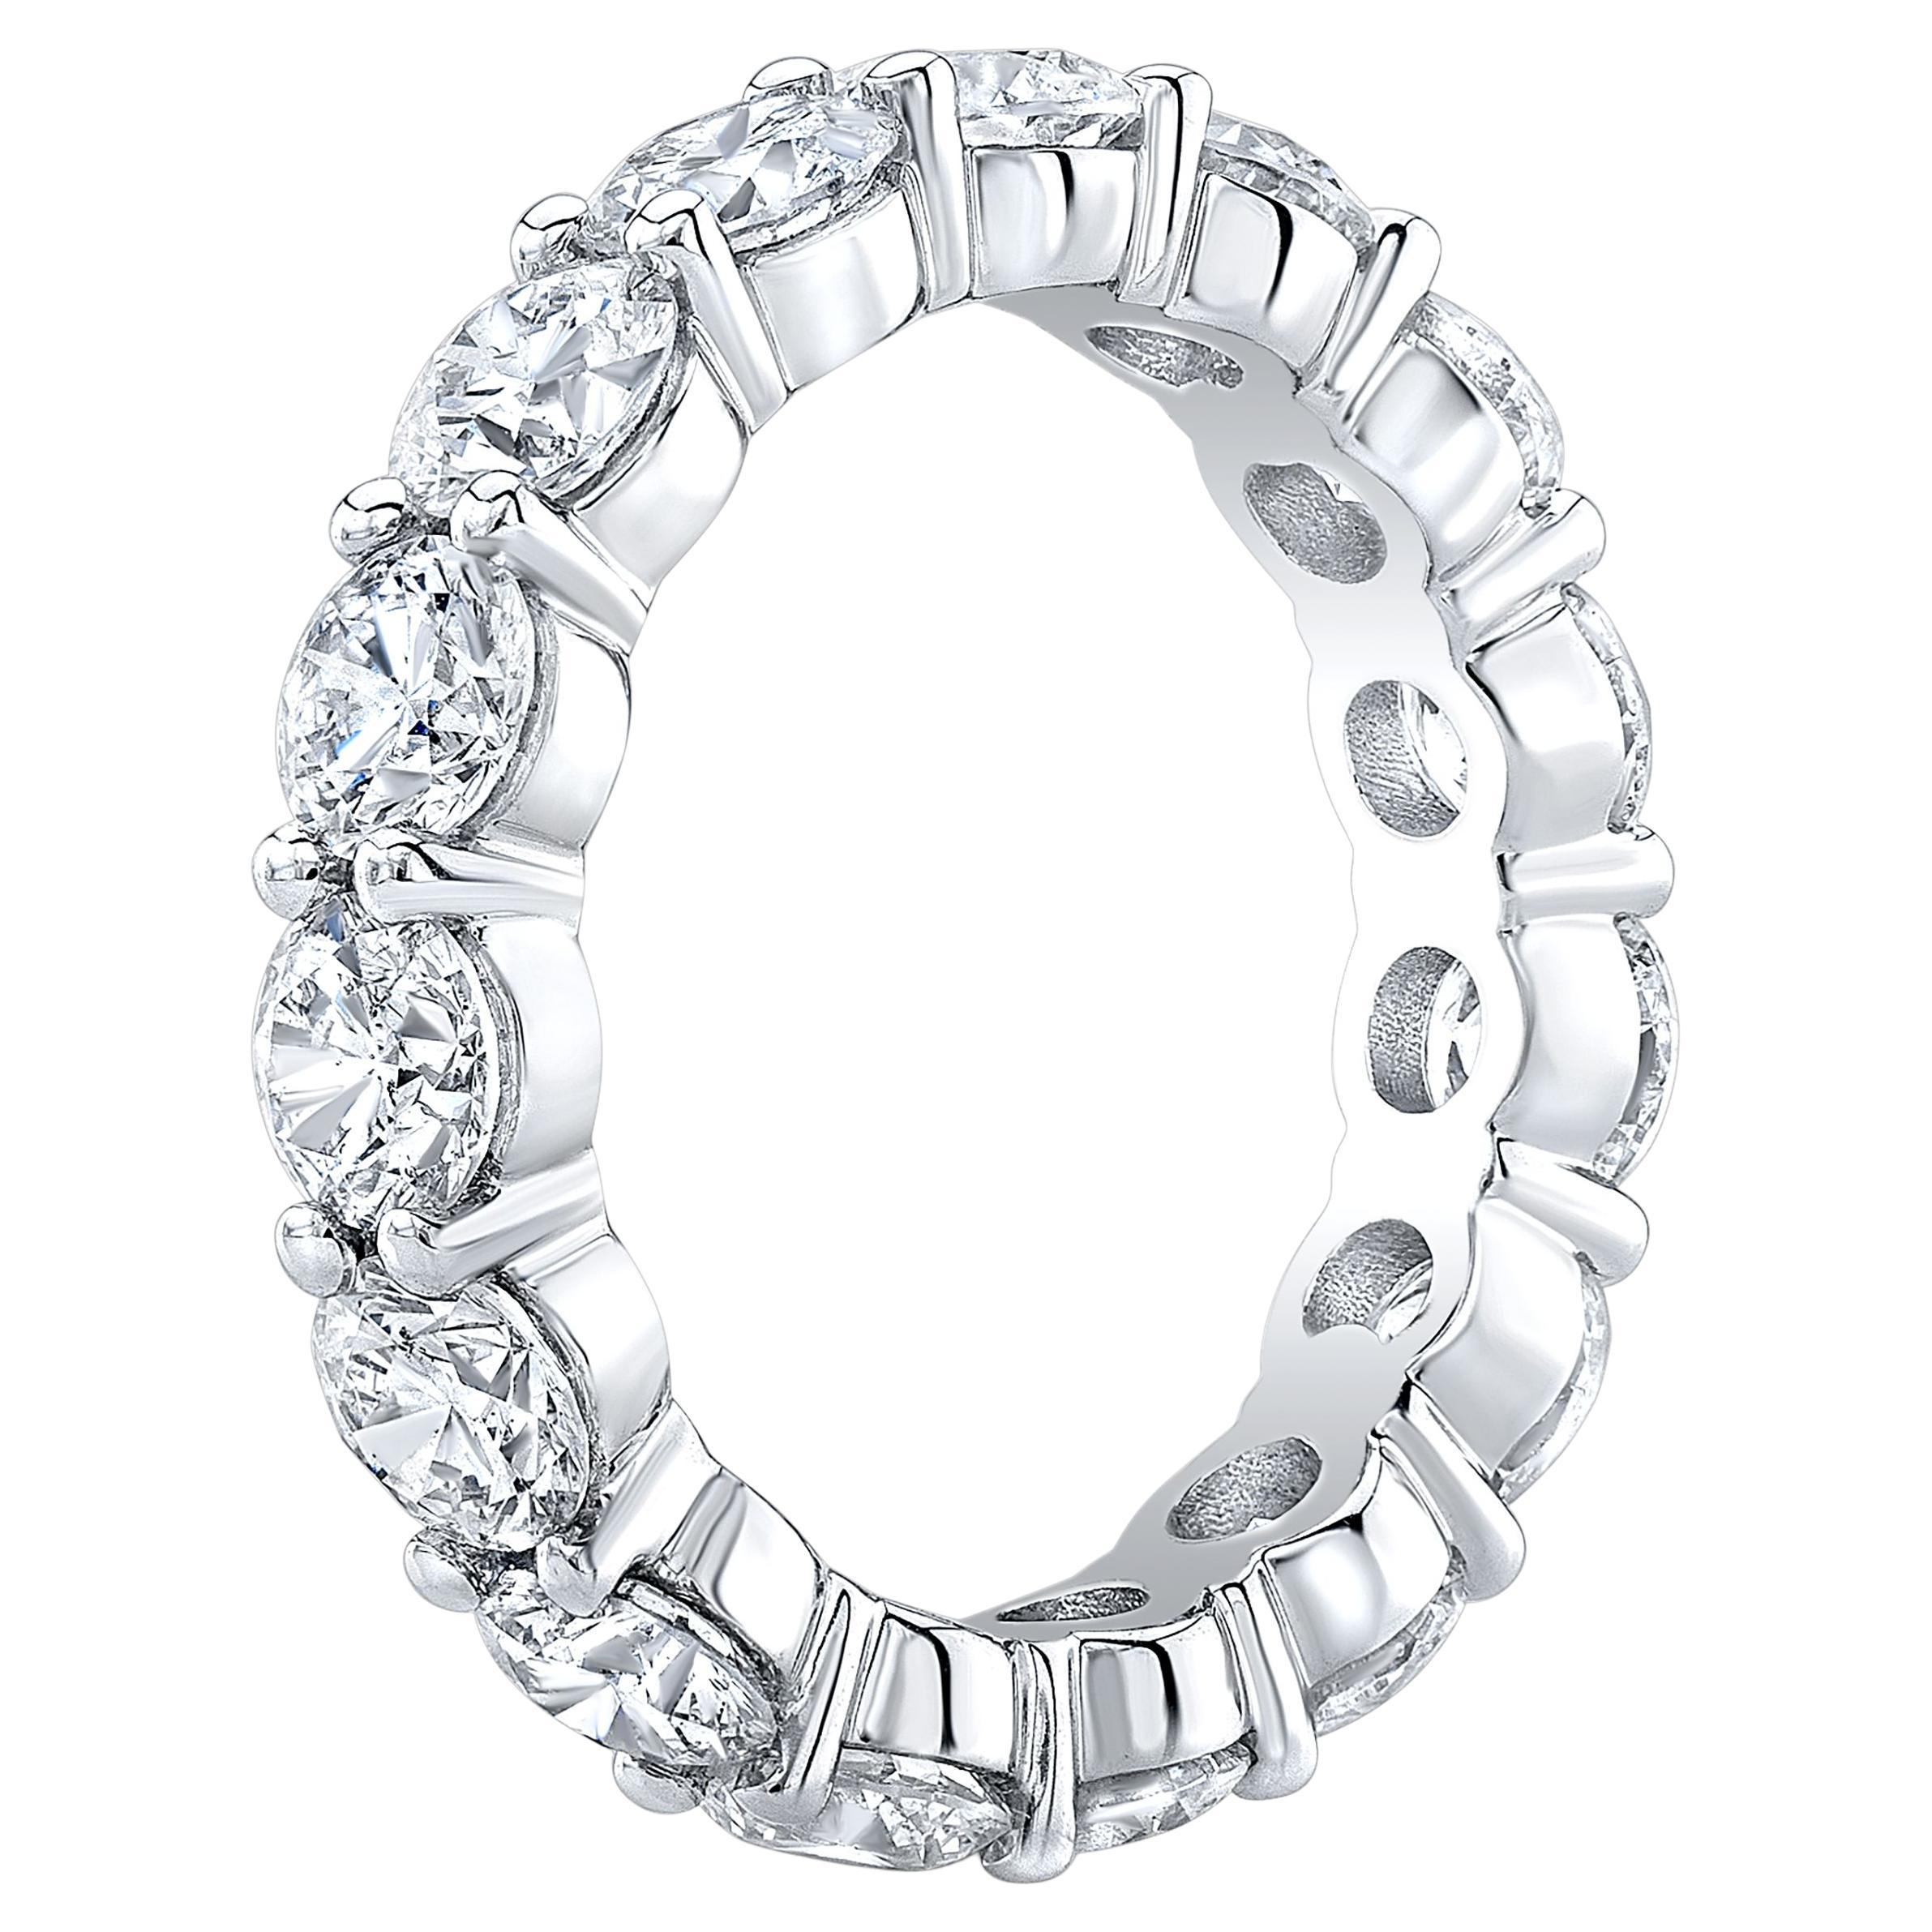 7 Carat Diamond Eternity Band Classic Round Cut G-H Color SI1 Clarity 14k Gold